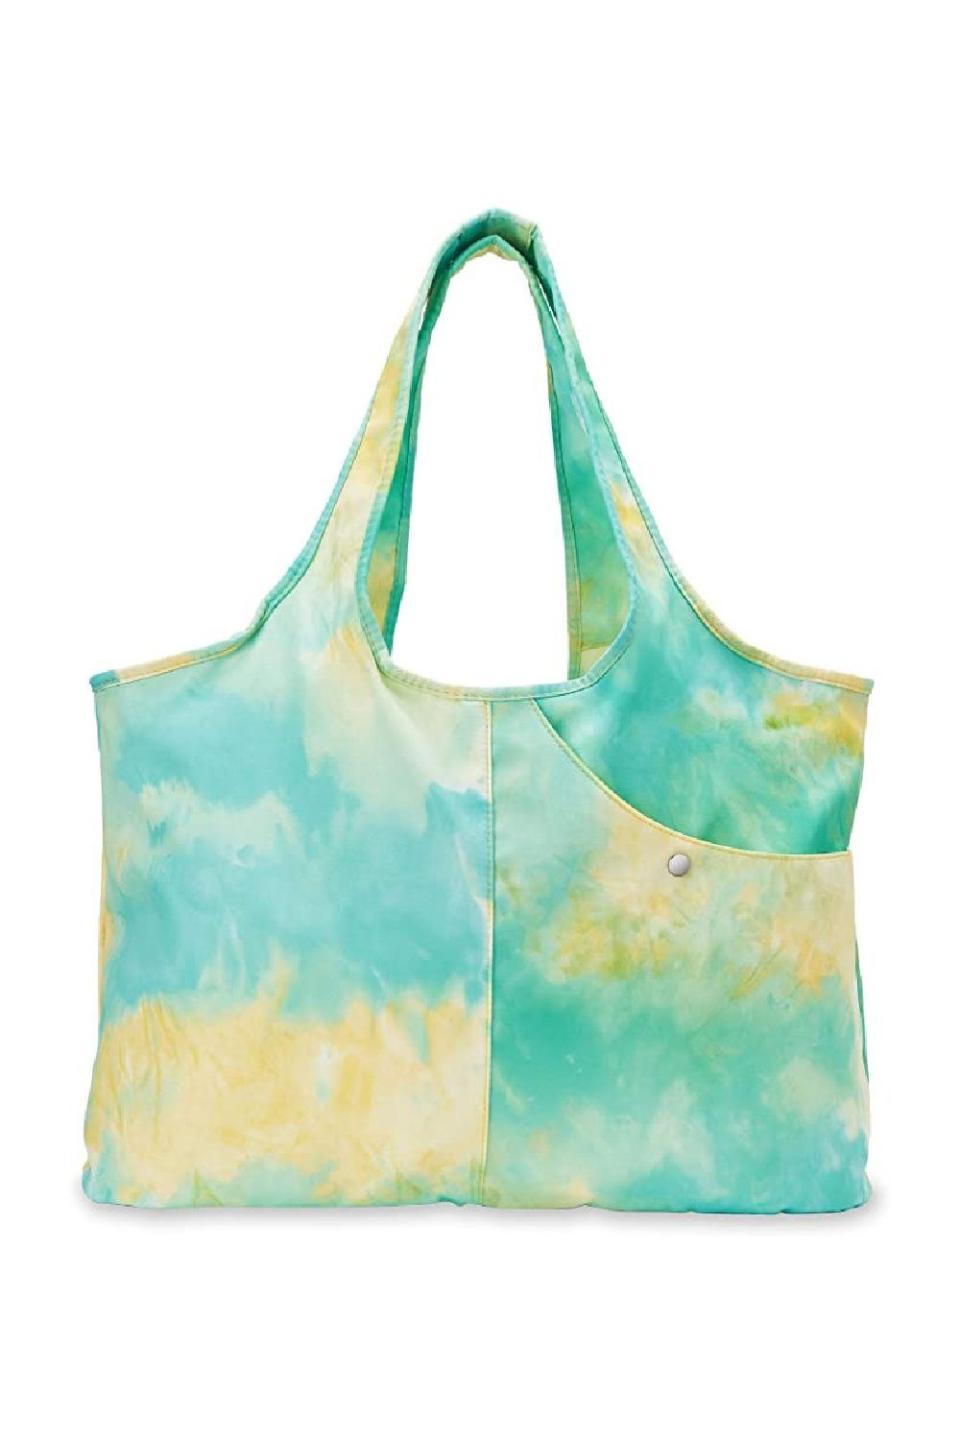 11) Women Colorful Large Tote